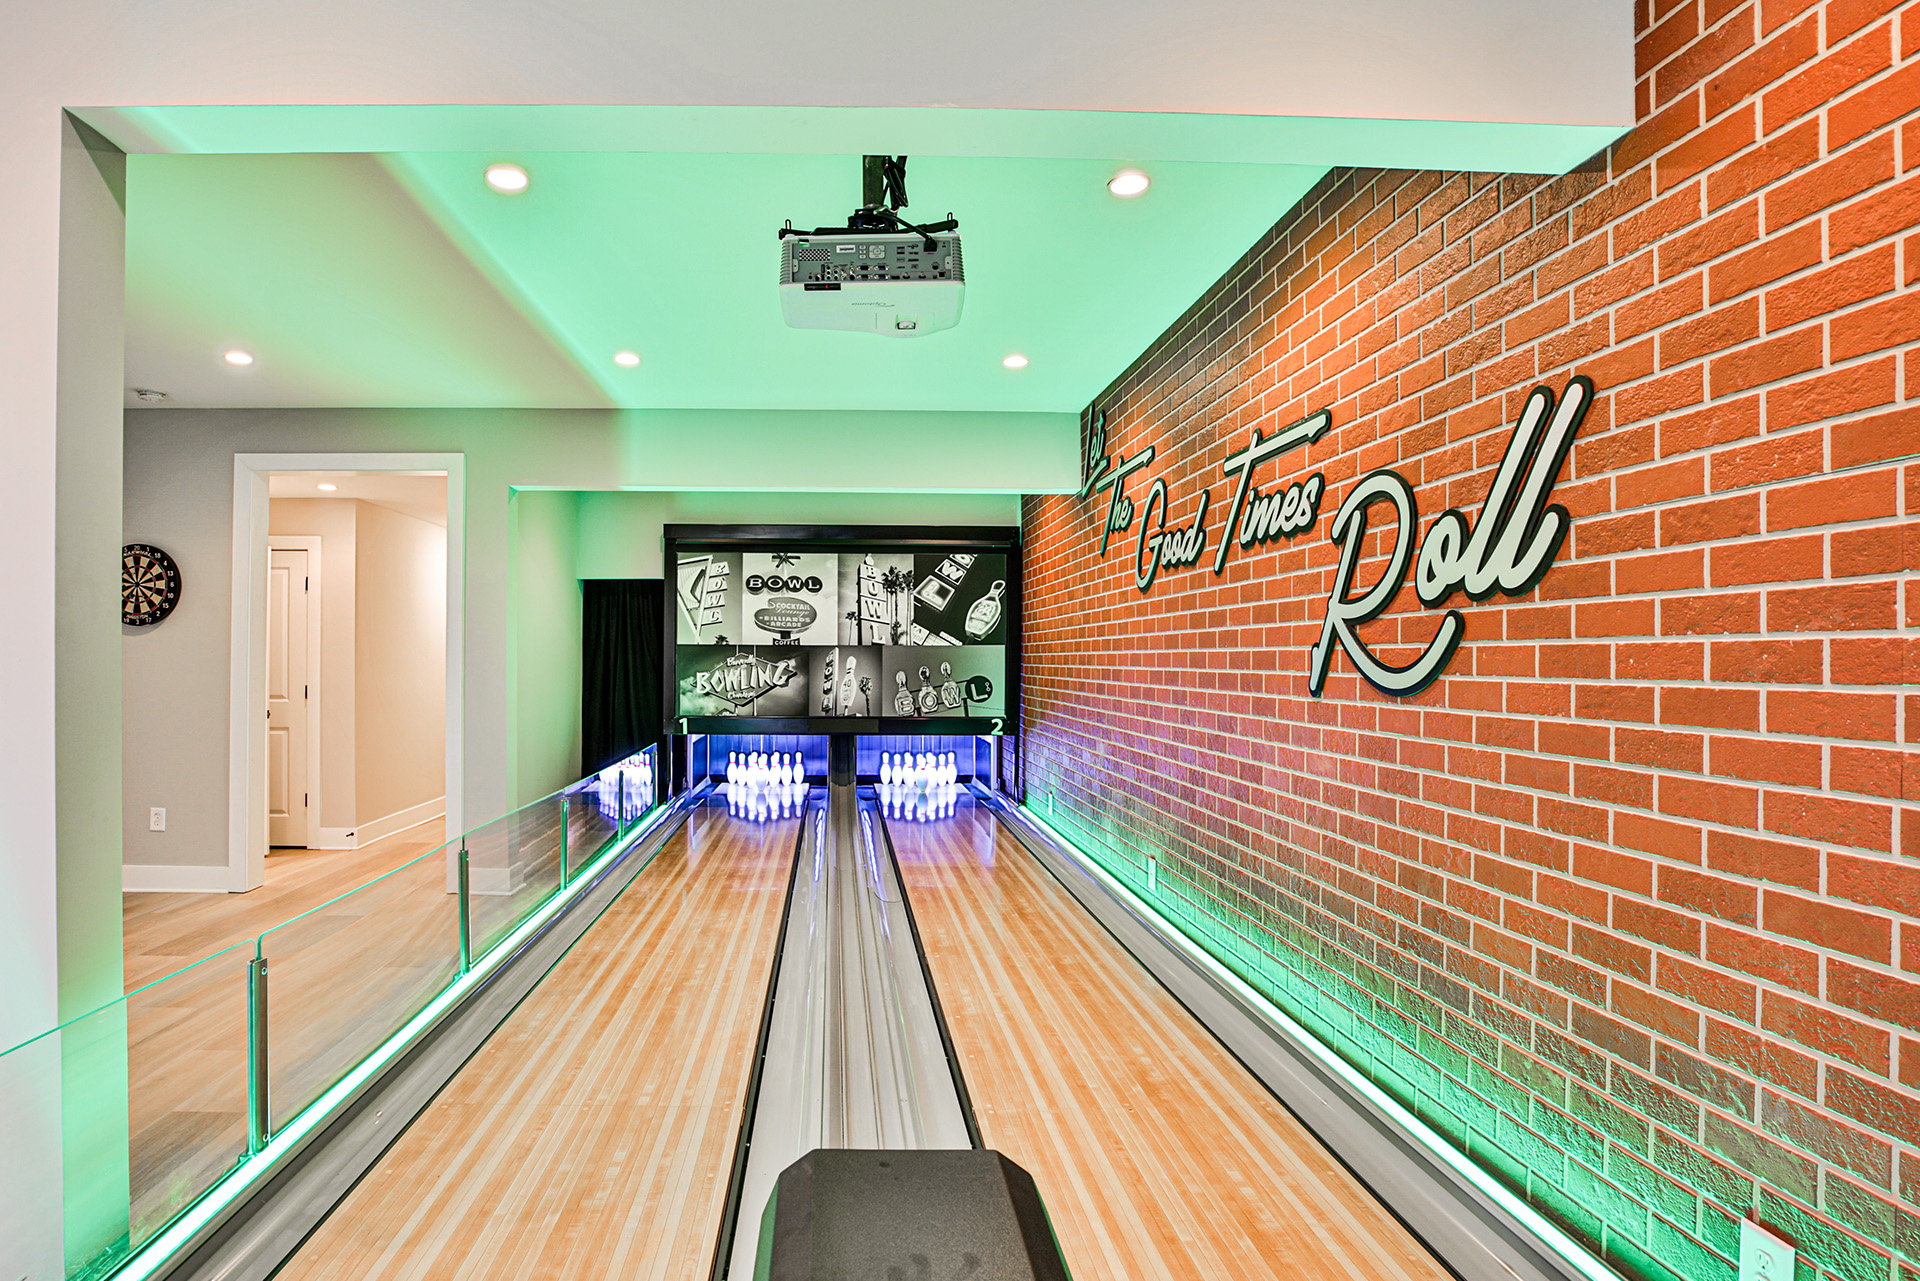 Indoor bowling alley on HGTV's Rock the Block that used PlymouthBrick on an interior wall with Let the Good Times Roll neon sign